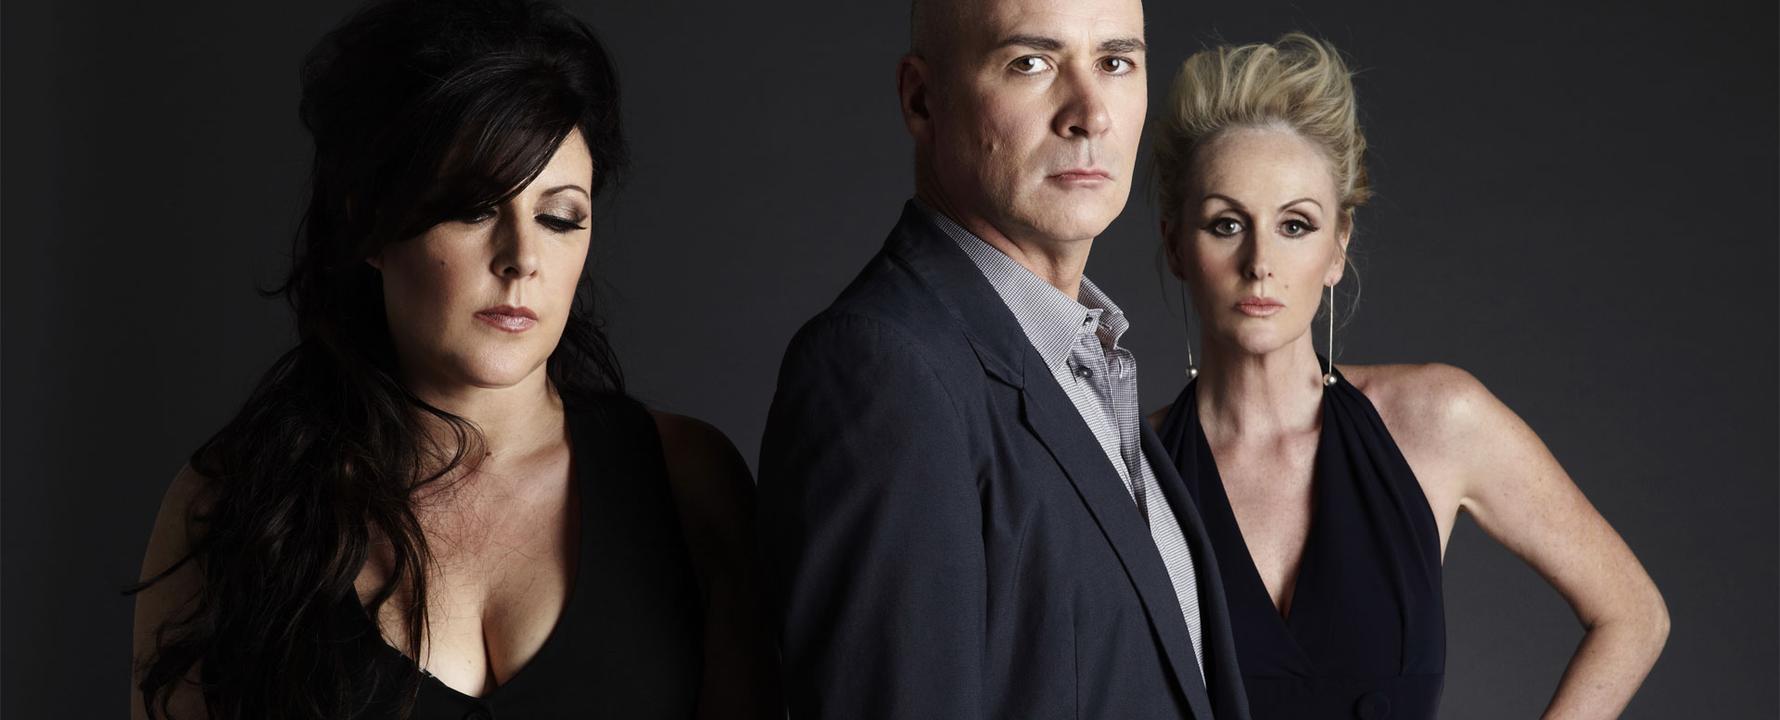 Promotional photograph of The Human League.